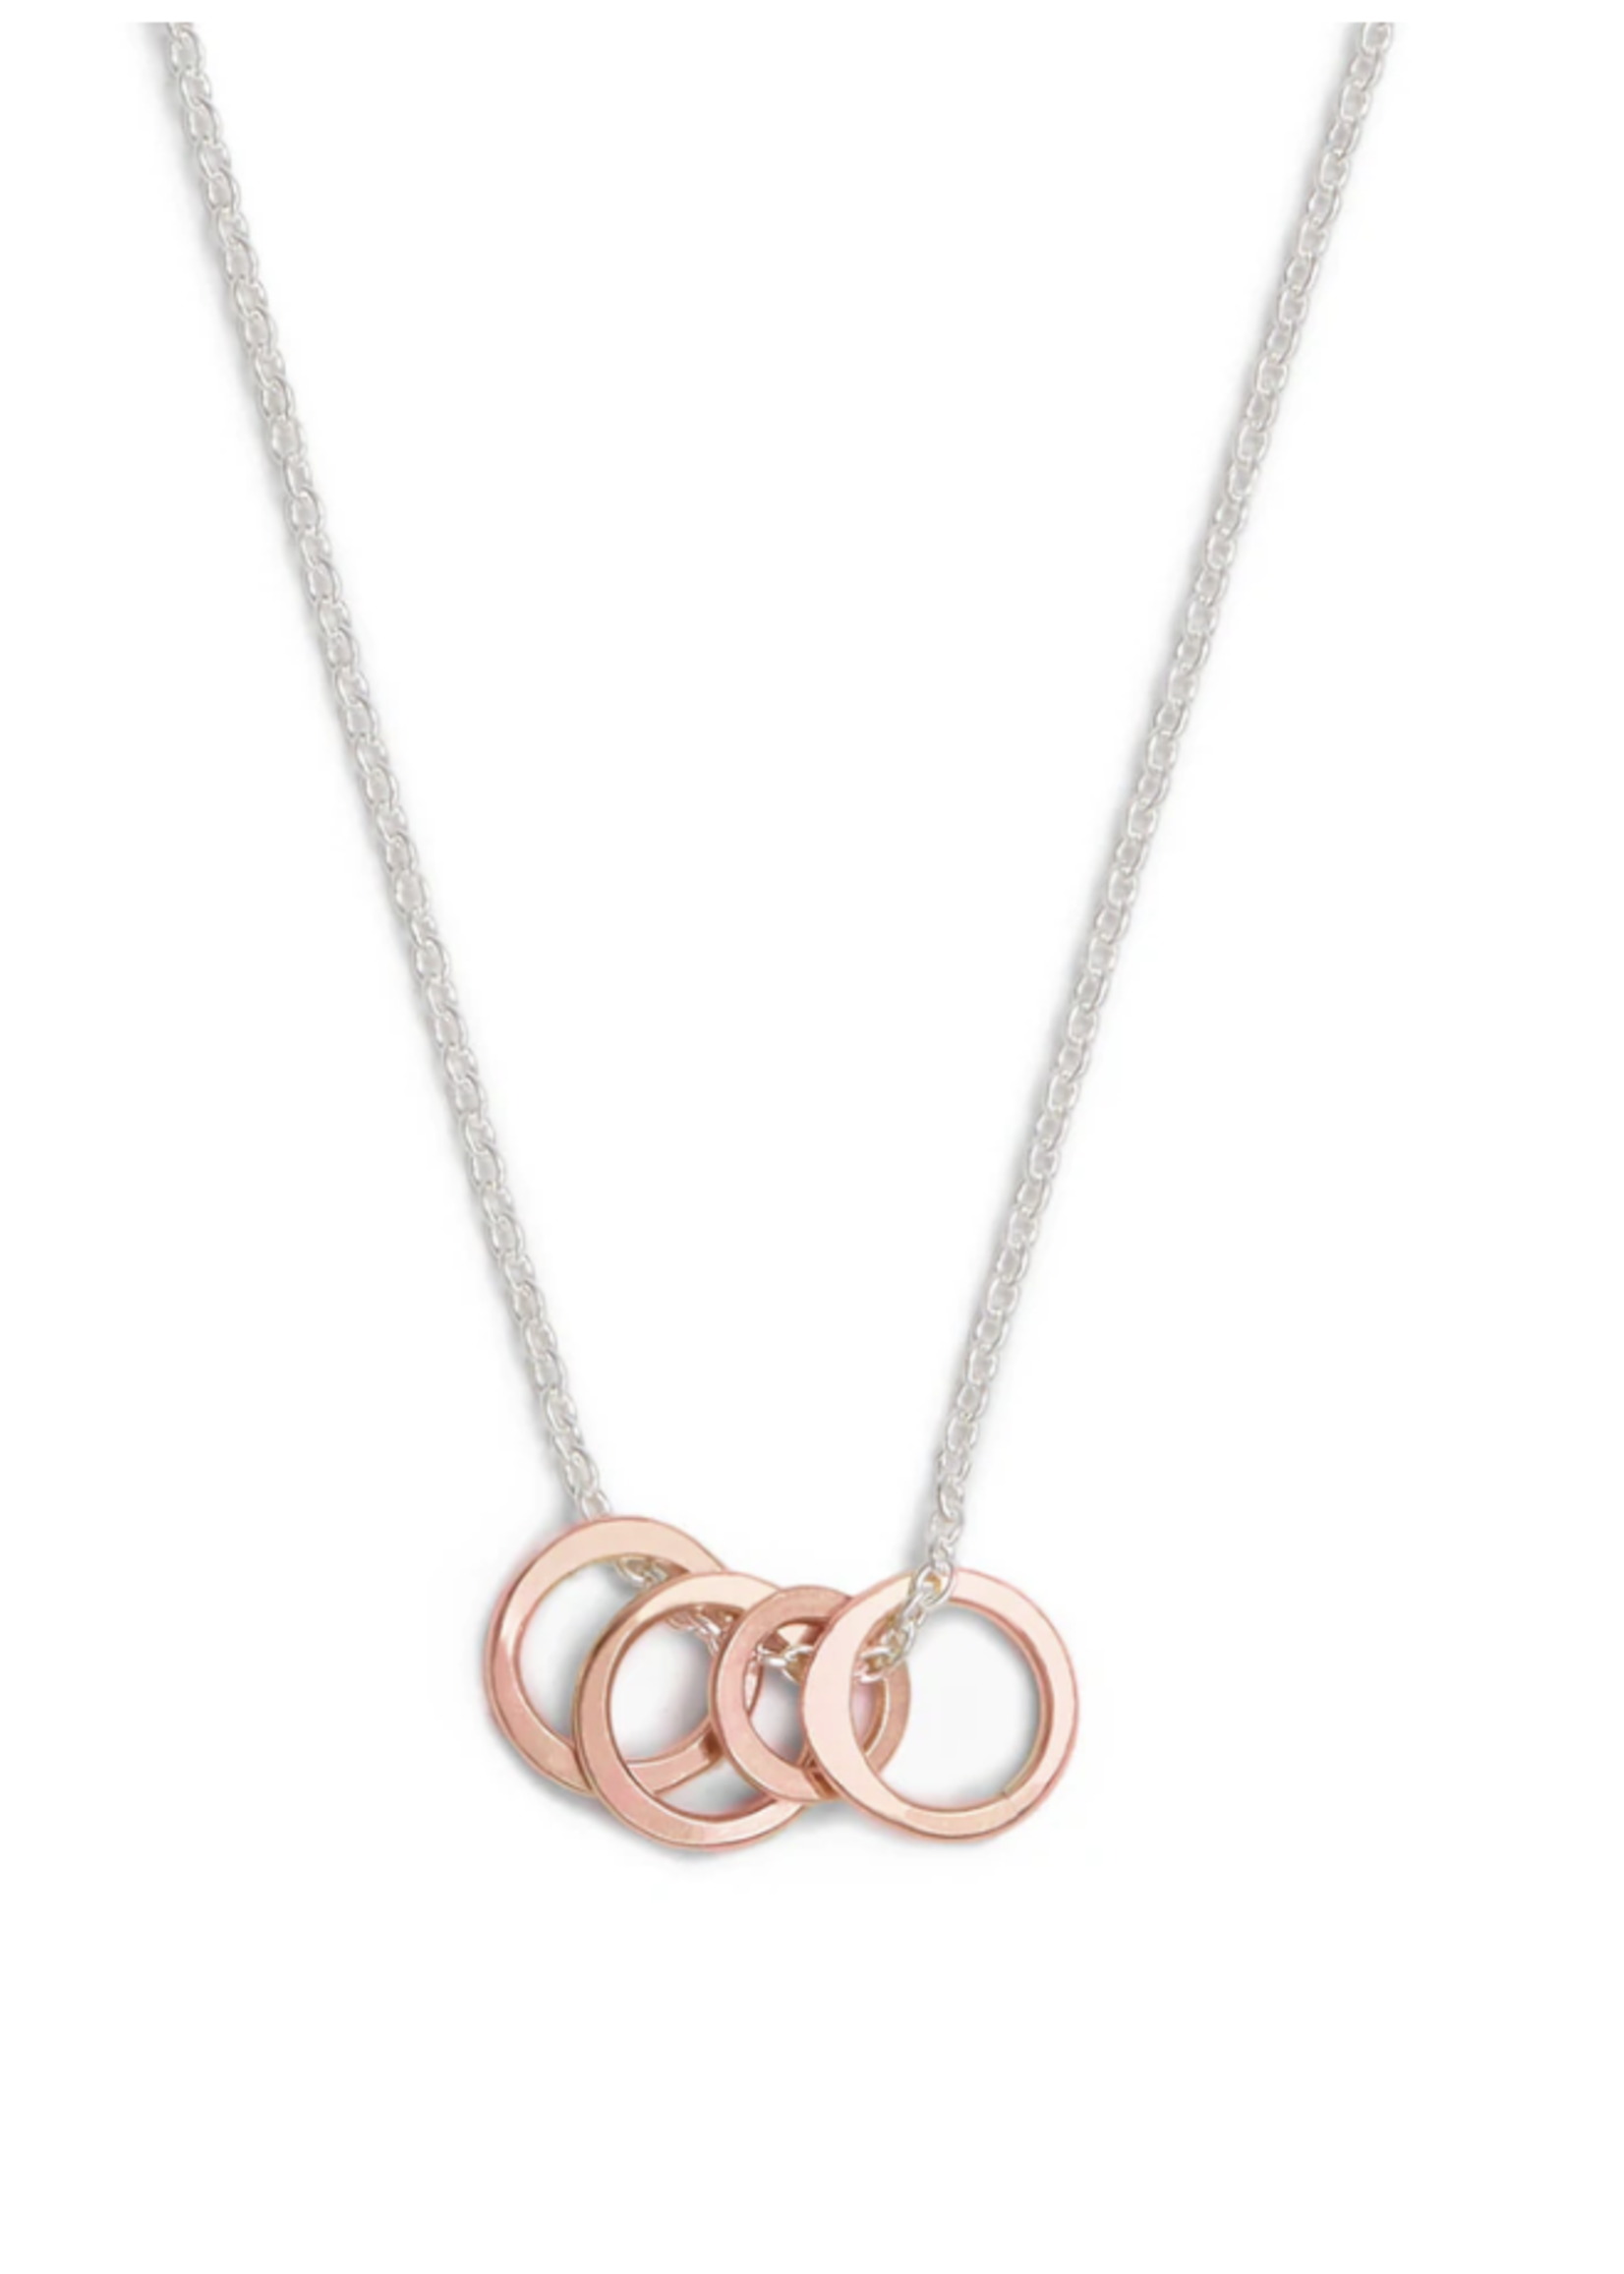 Freshie & Zero Rose Pink Cluster Necklace, Four Tiny Circles, 16"